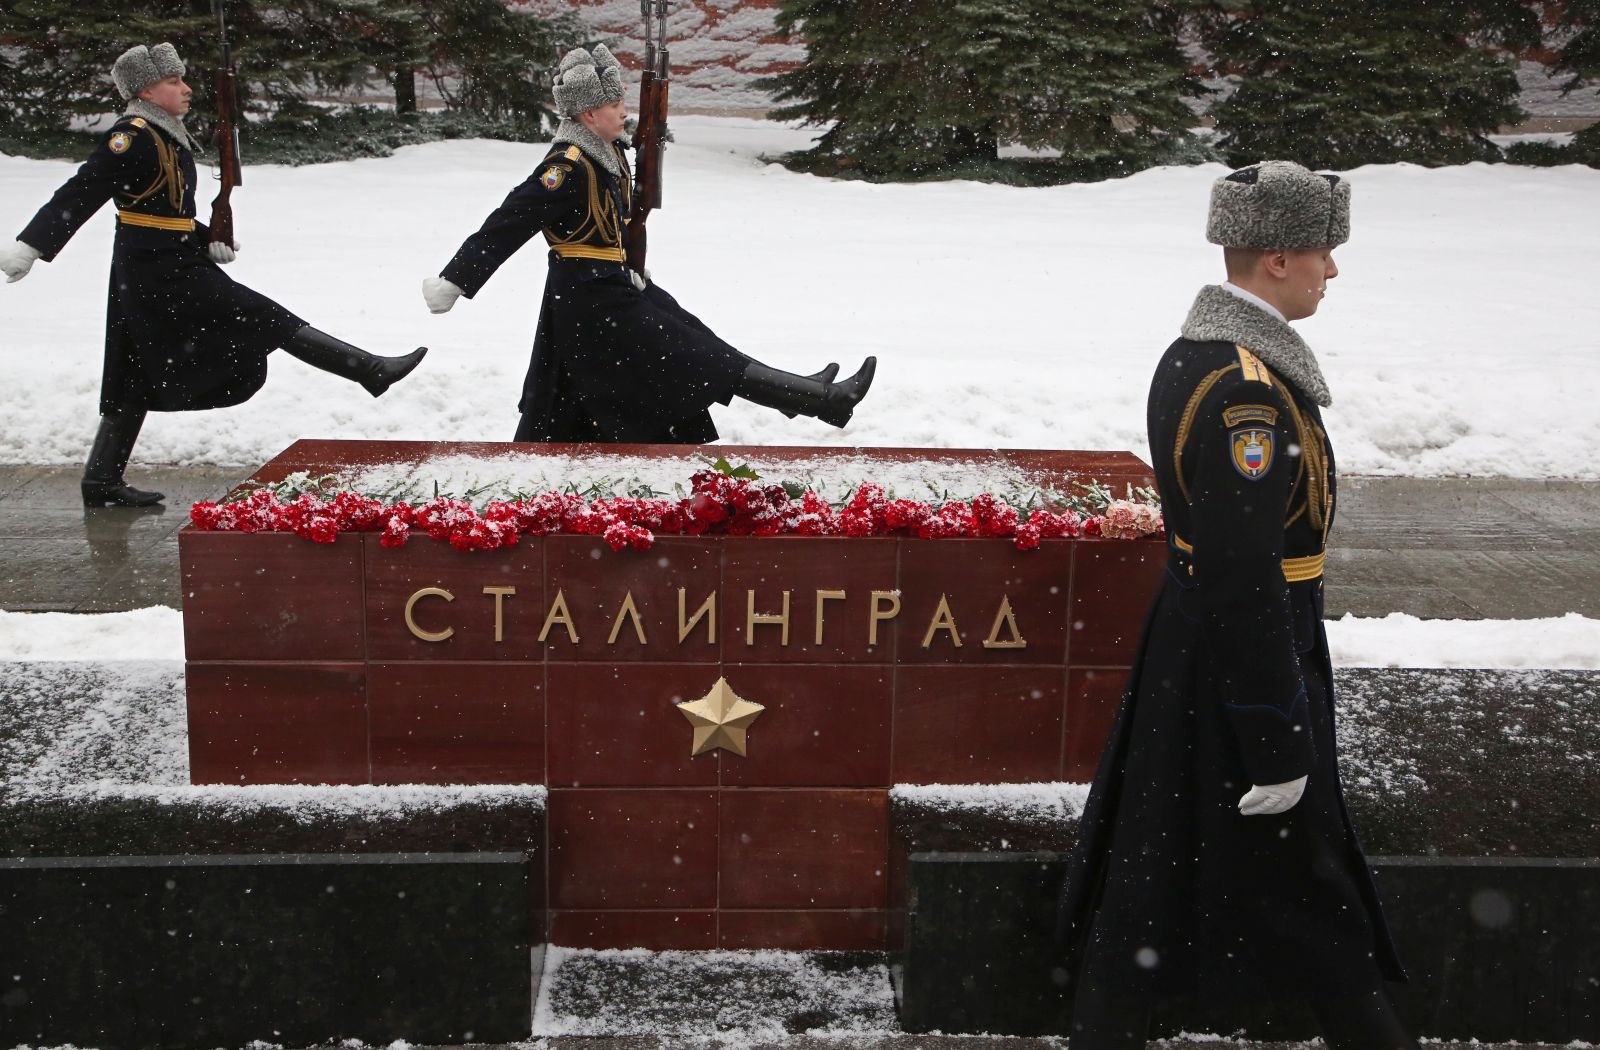 epa10442902 Russian honour guard soldiers march in front of the memorial stone for World War II Hero City Stalingrad near the Tomb of the Unknown Soldier in front of the Kremlin wall at Alexander Garden in Moscow, Russia, 01 February 2023. Russia on February 02 marks the 80th anniversary of the end of the Battle of Stalingrad, now known as Volgograd, a turning point in World War II which led to the defeat of Nazi Germany.  EPA/MAXIM SHIPENKOV